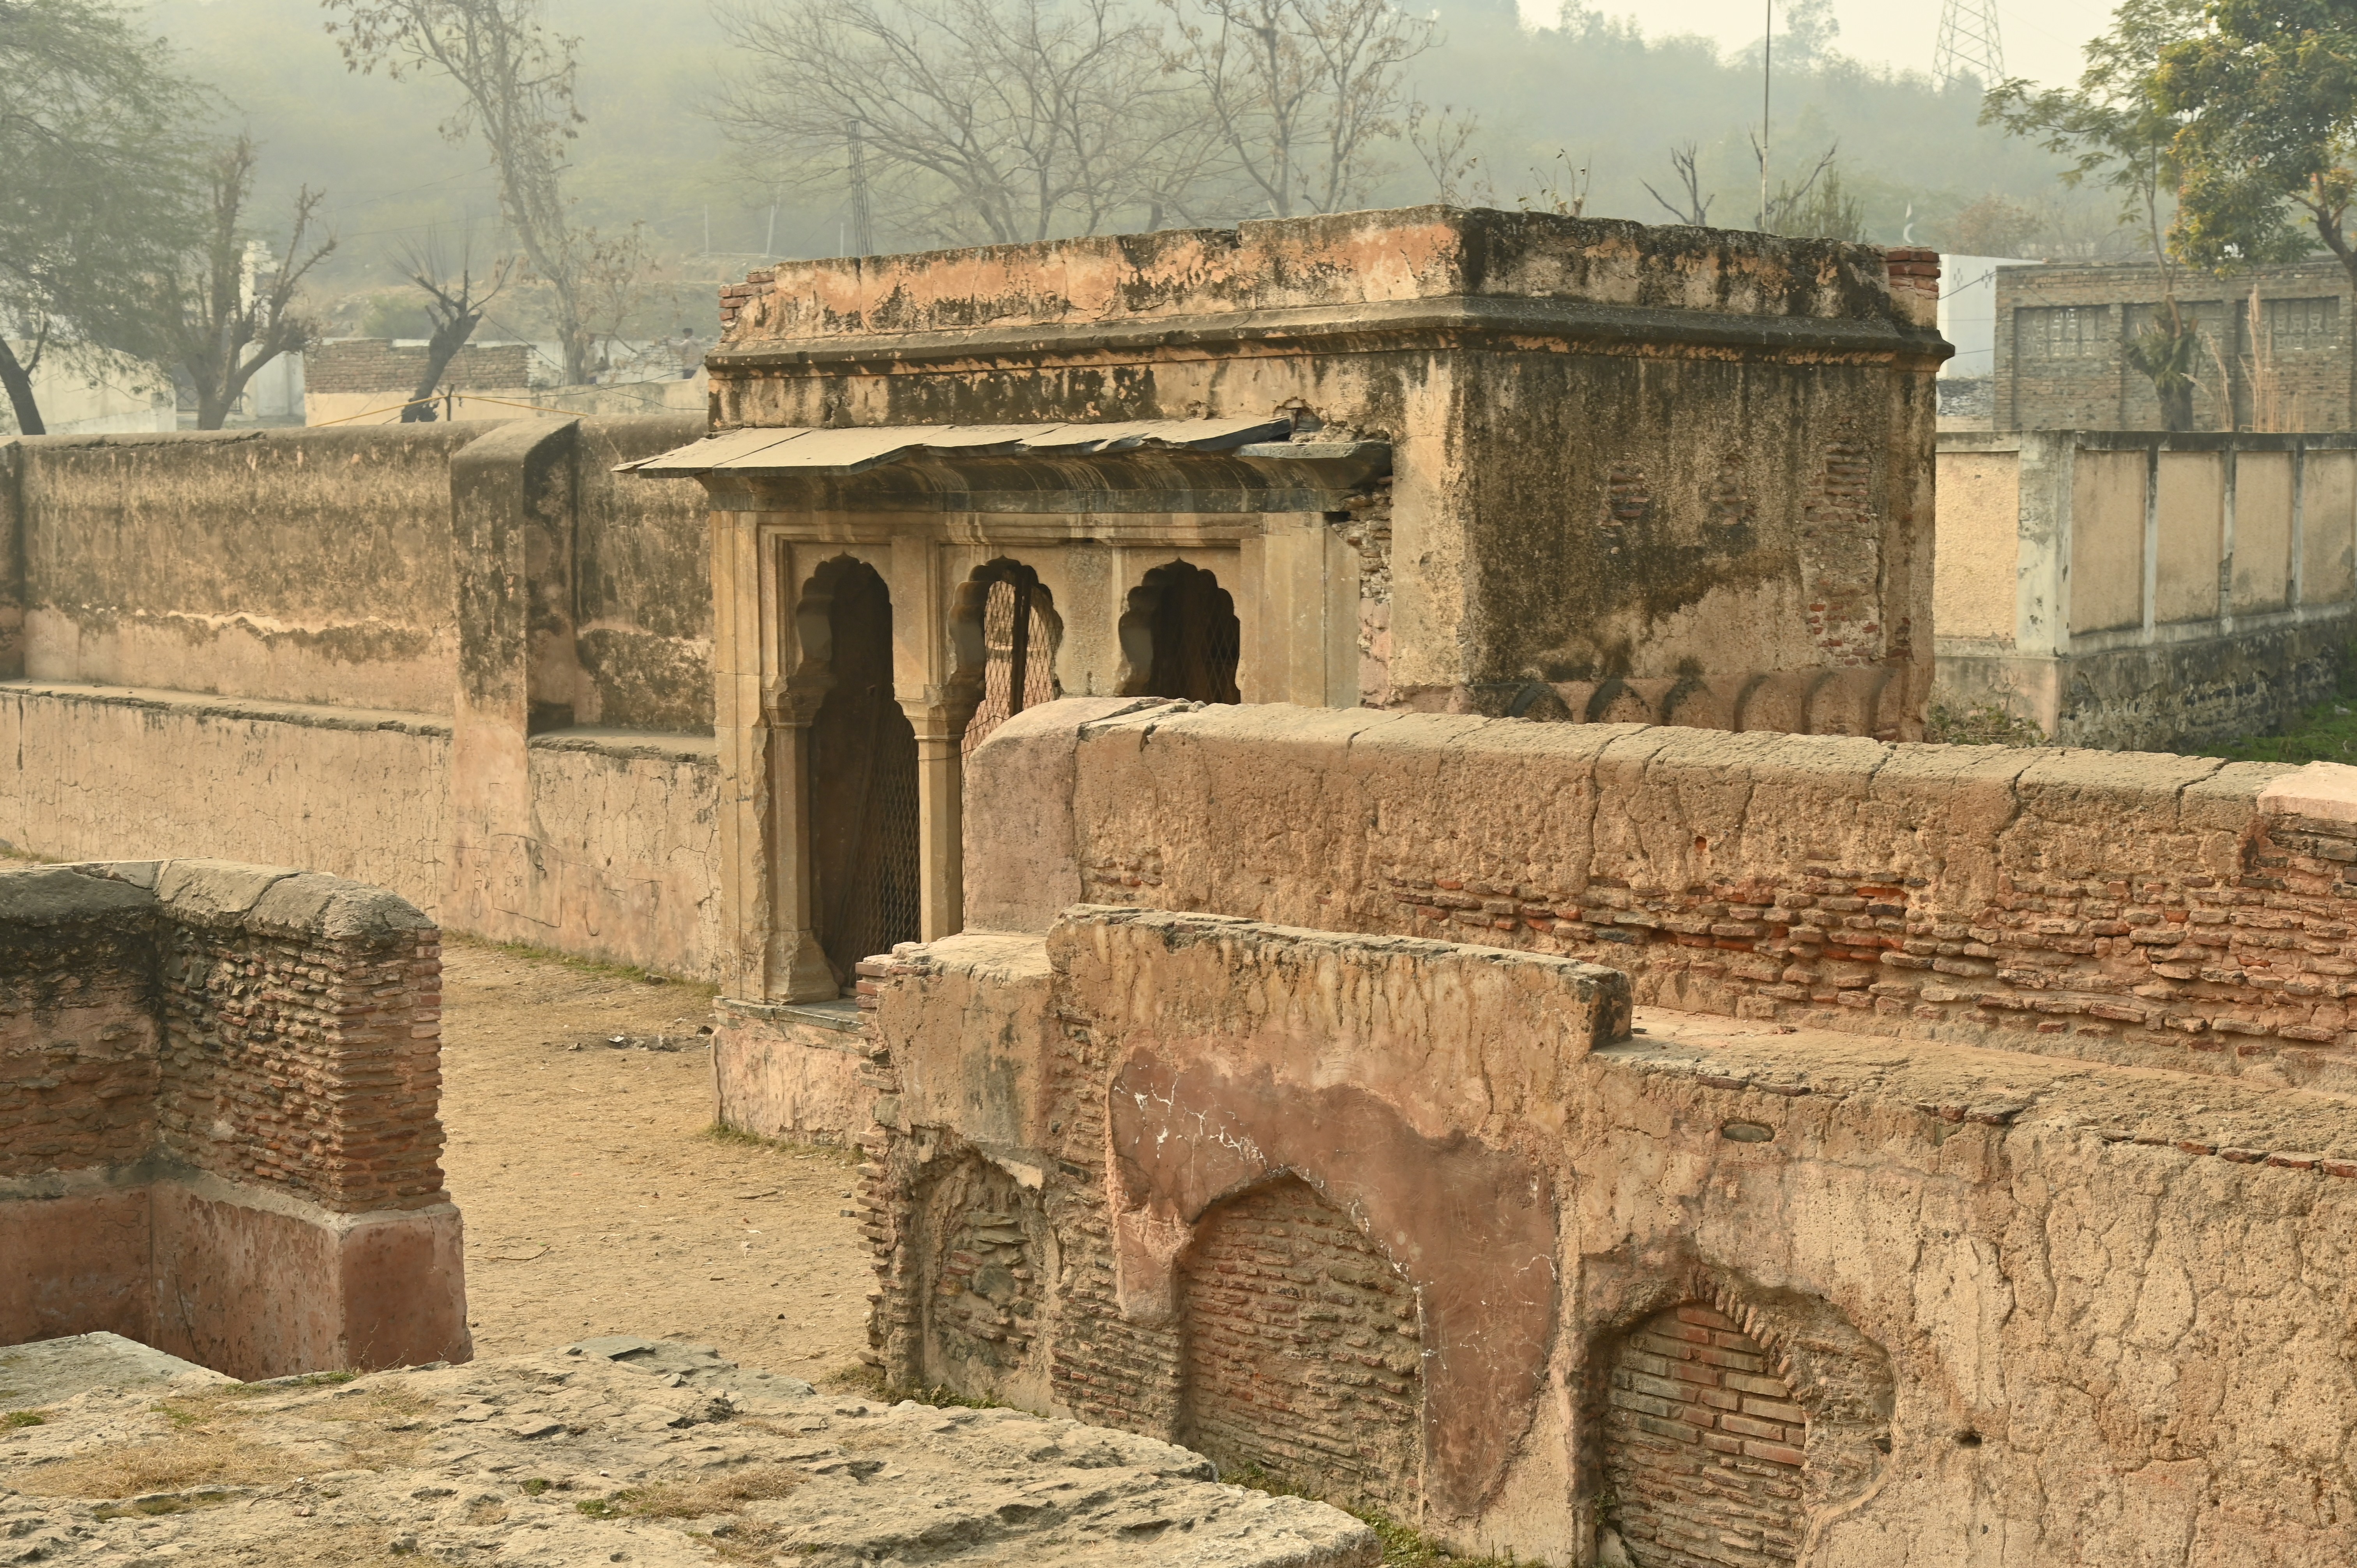 The remains of Behram ki Baradari, built by Behram Khan in 1681  and situated at the ridge of mountains on the southern side of G.T. Road near Attock Khurd